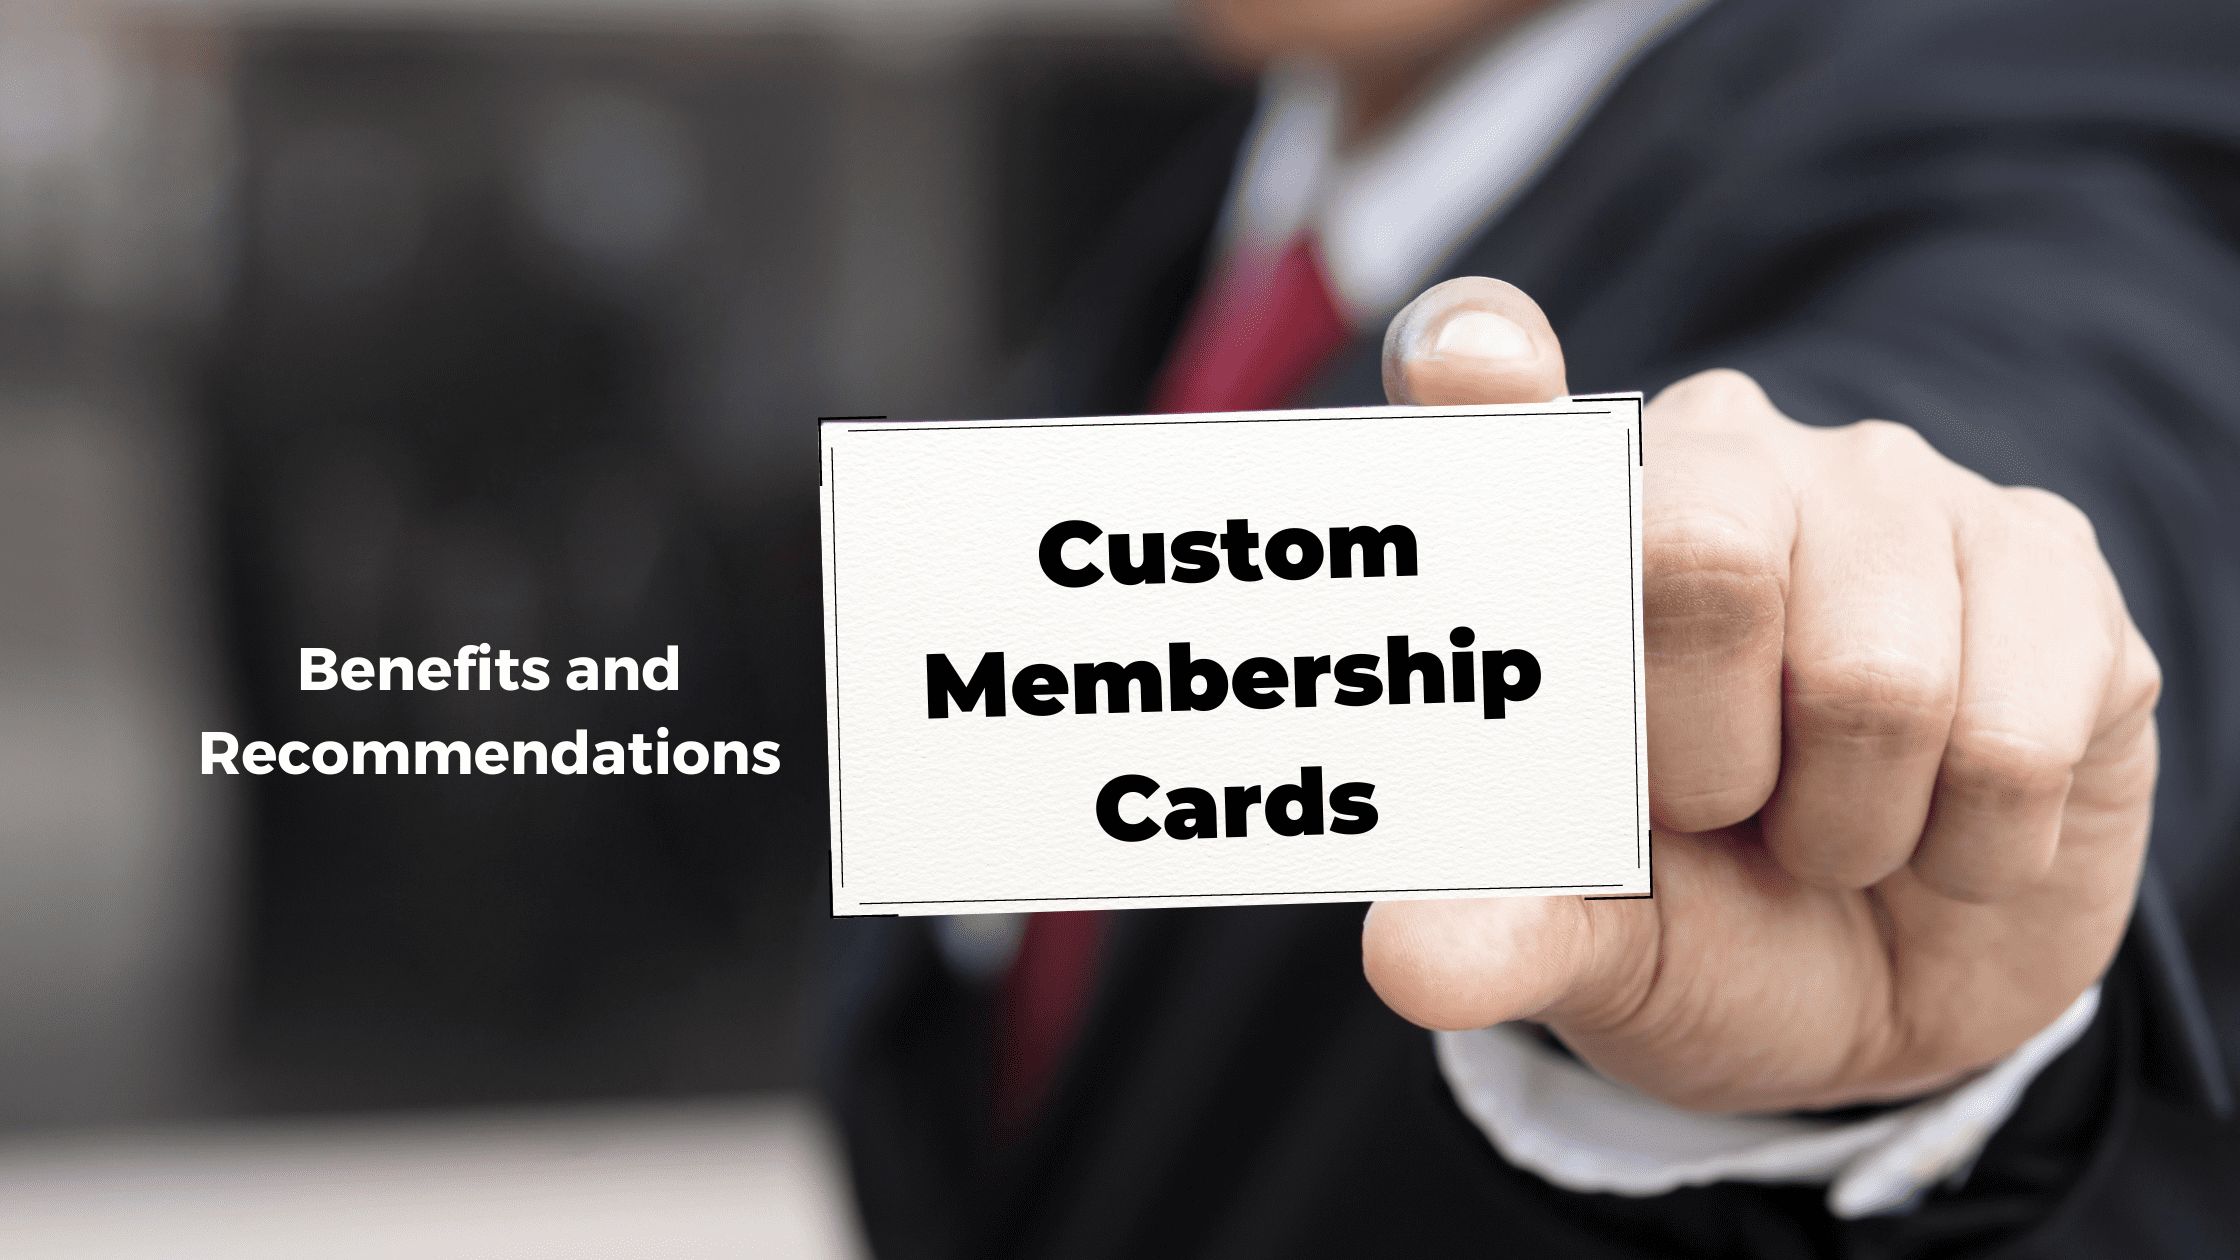 Custom Membership Cards: Benefits and Recommendations